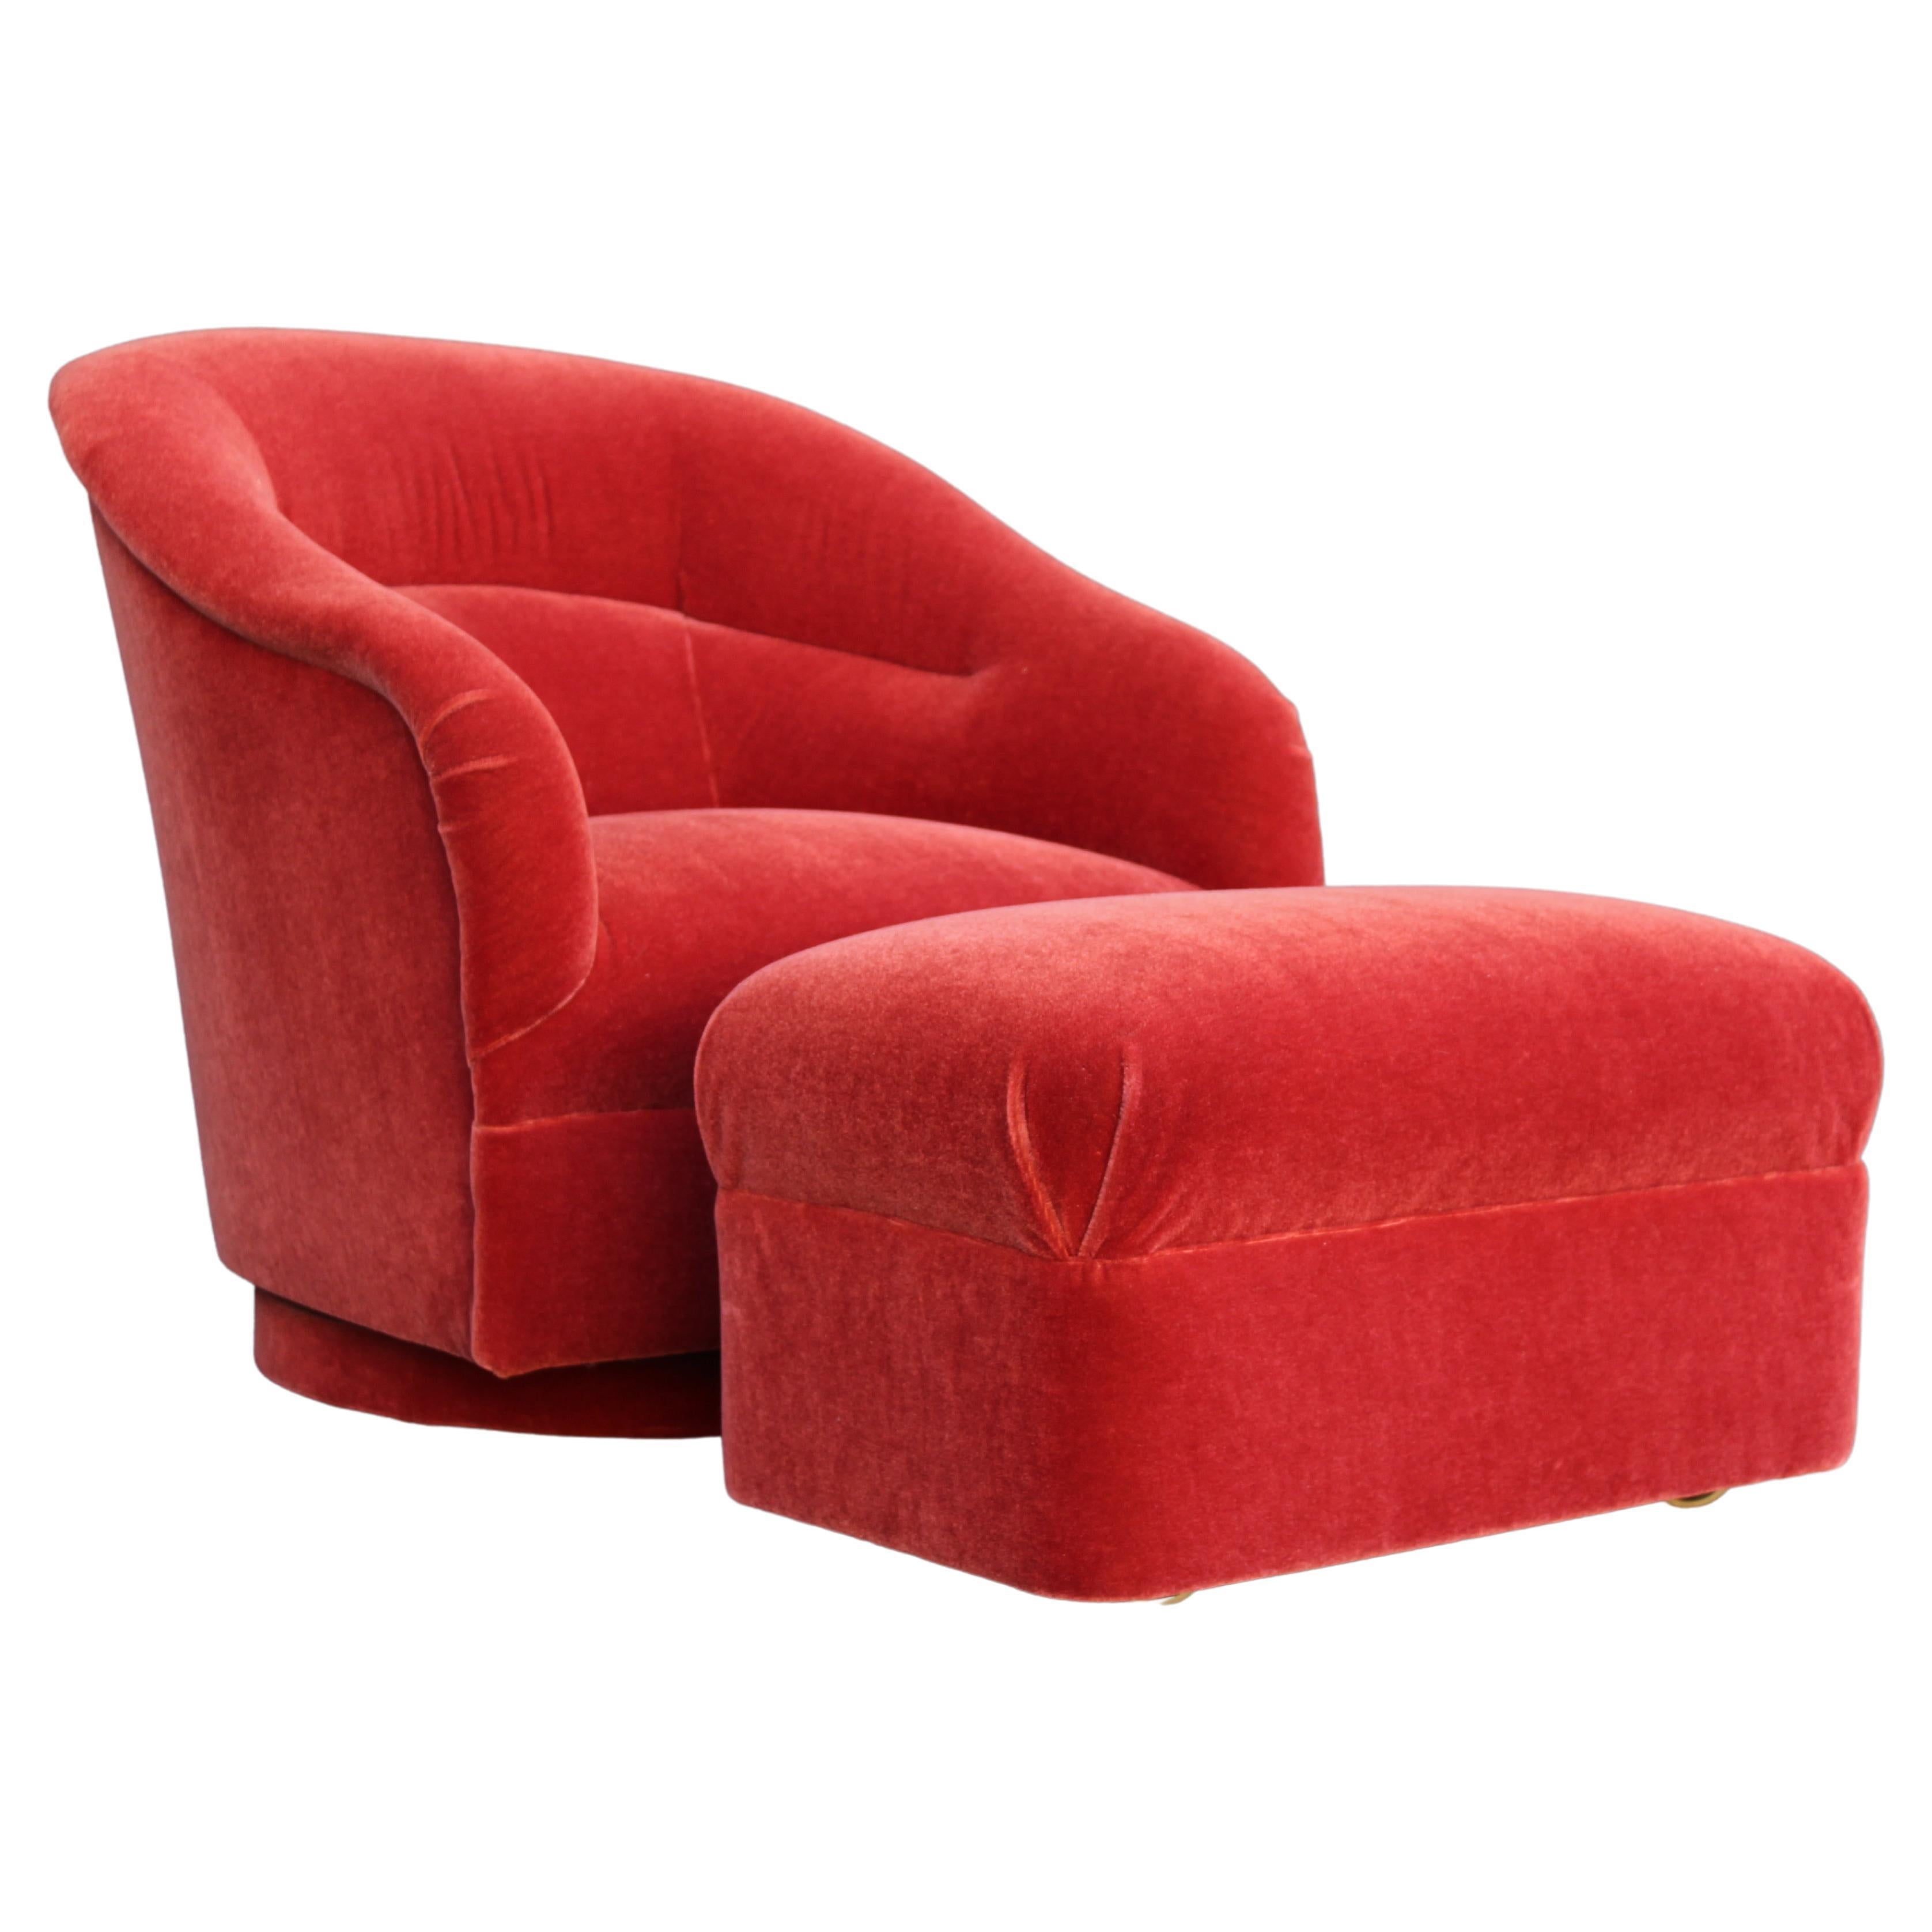 Ward Bennett Brickel Red Mohair Upholstered Swivel Tub Lounge Chair With Ottoman